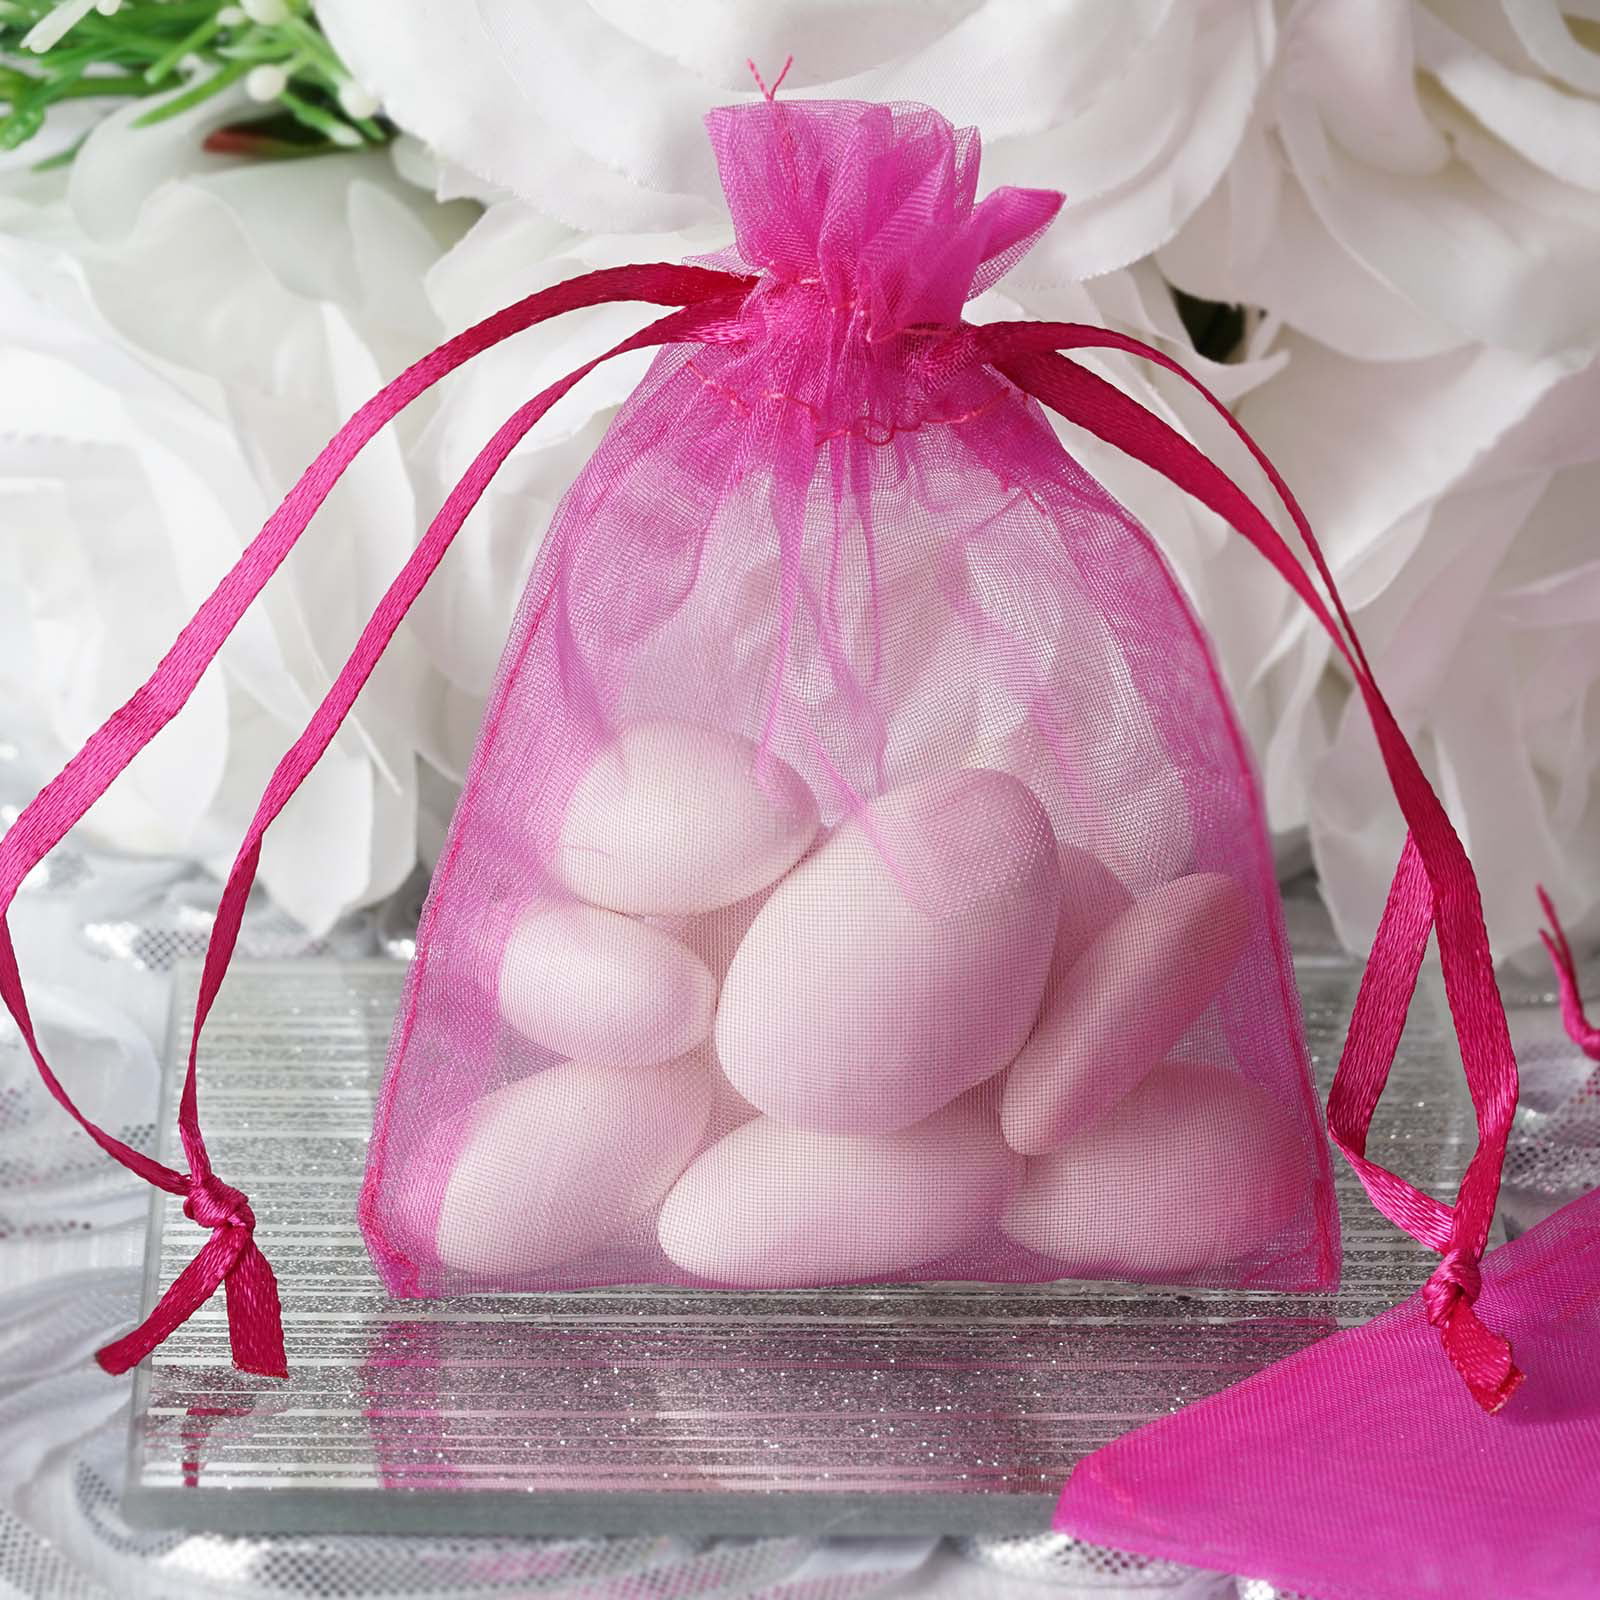 10pcs Organza Gift Bags Jewellery Pouch Wedding Party Candy Pouch Crafts Decor 